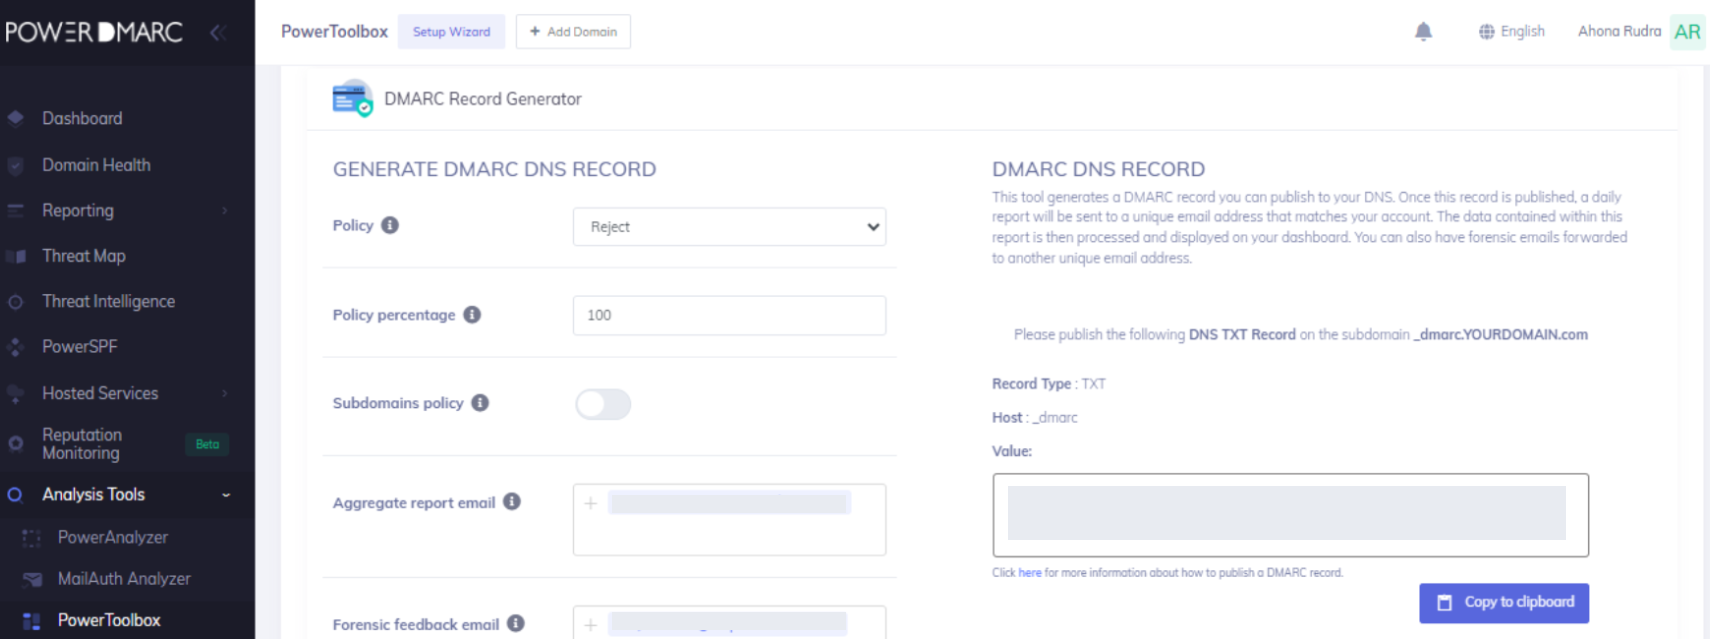 Create-your-TXT-record-for-Shopify-DMARC-using-our-DMARC-generator-to-ol